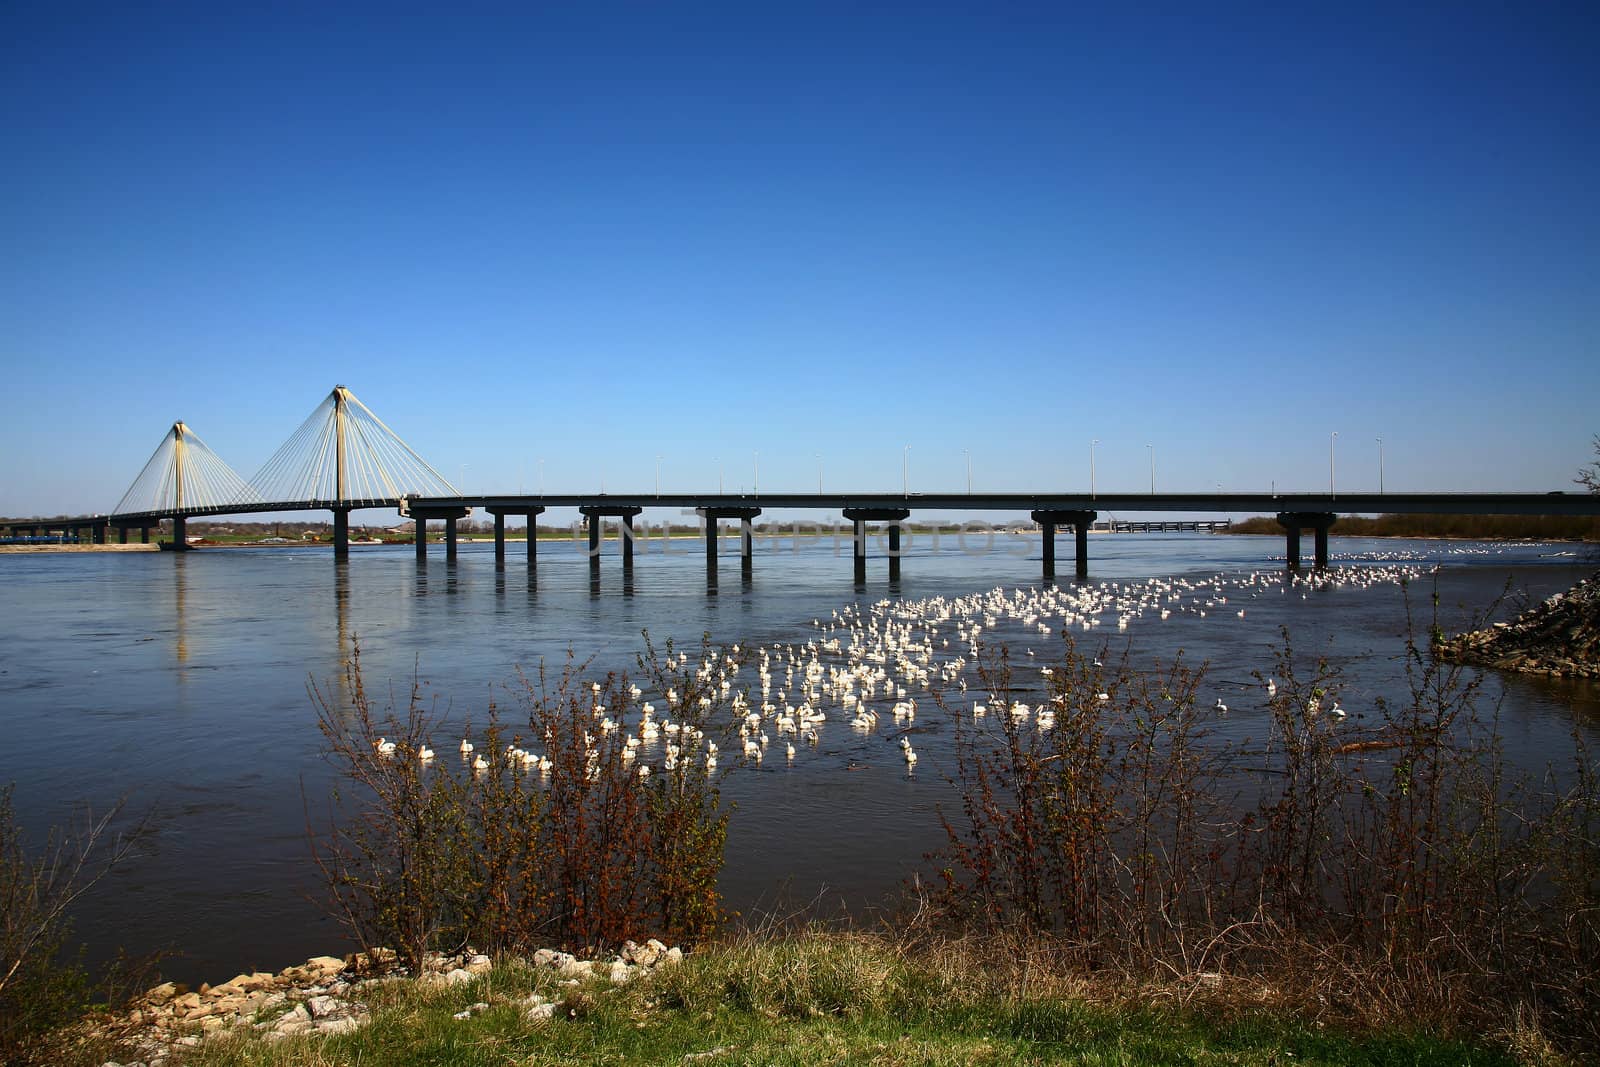 Mississippi River Bridge with a flock of Pelicans